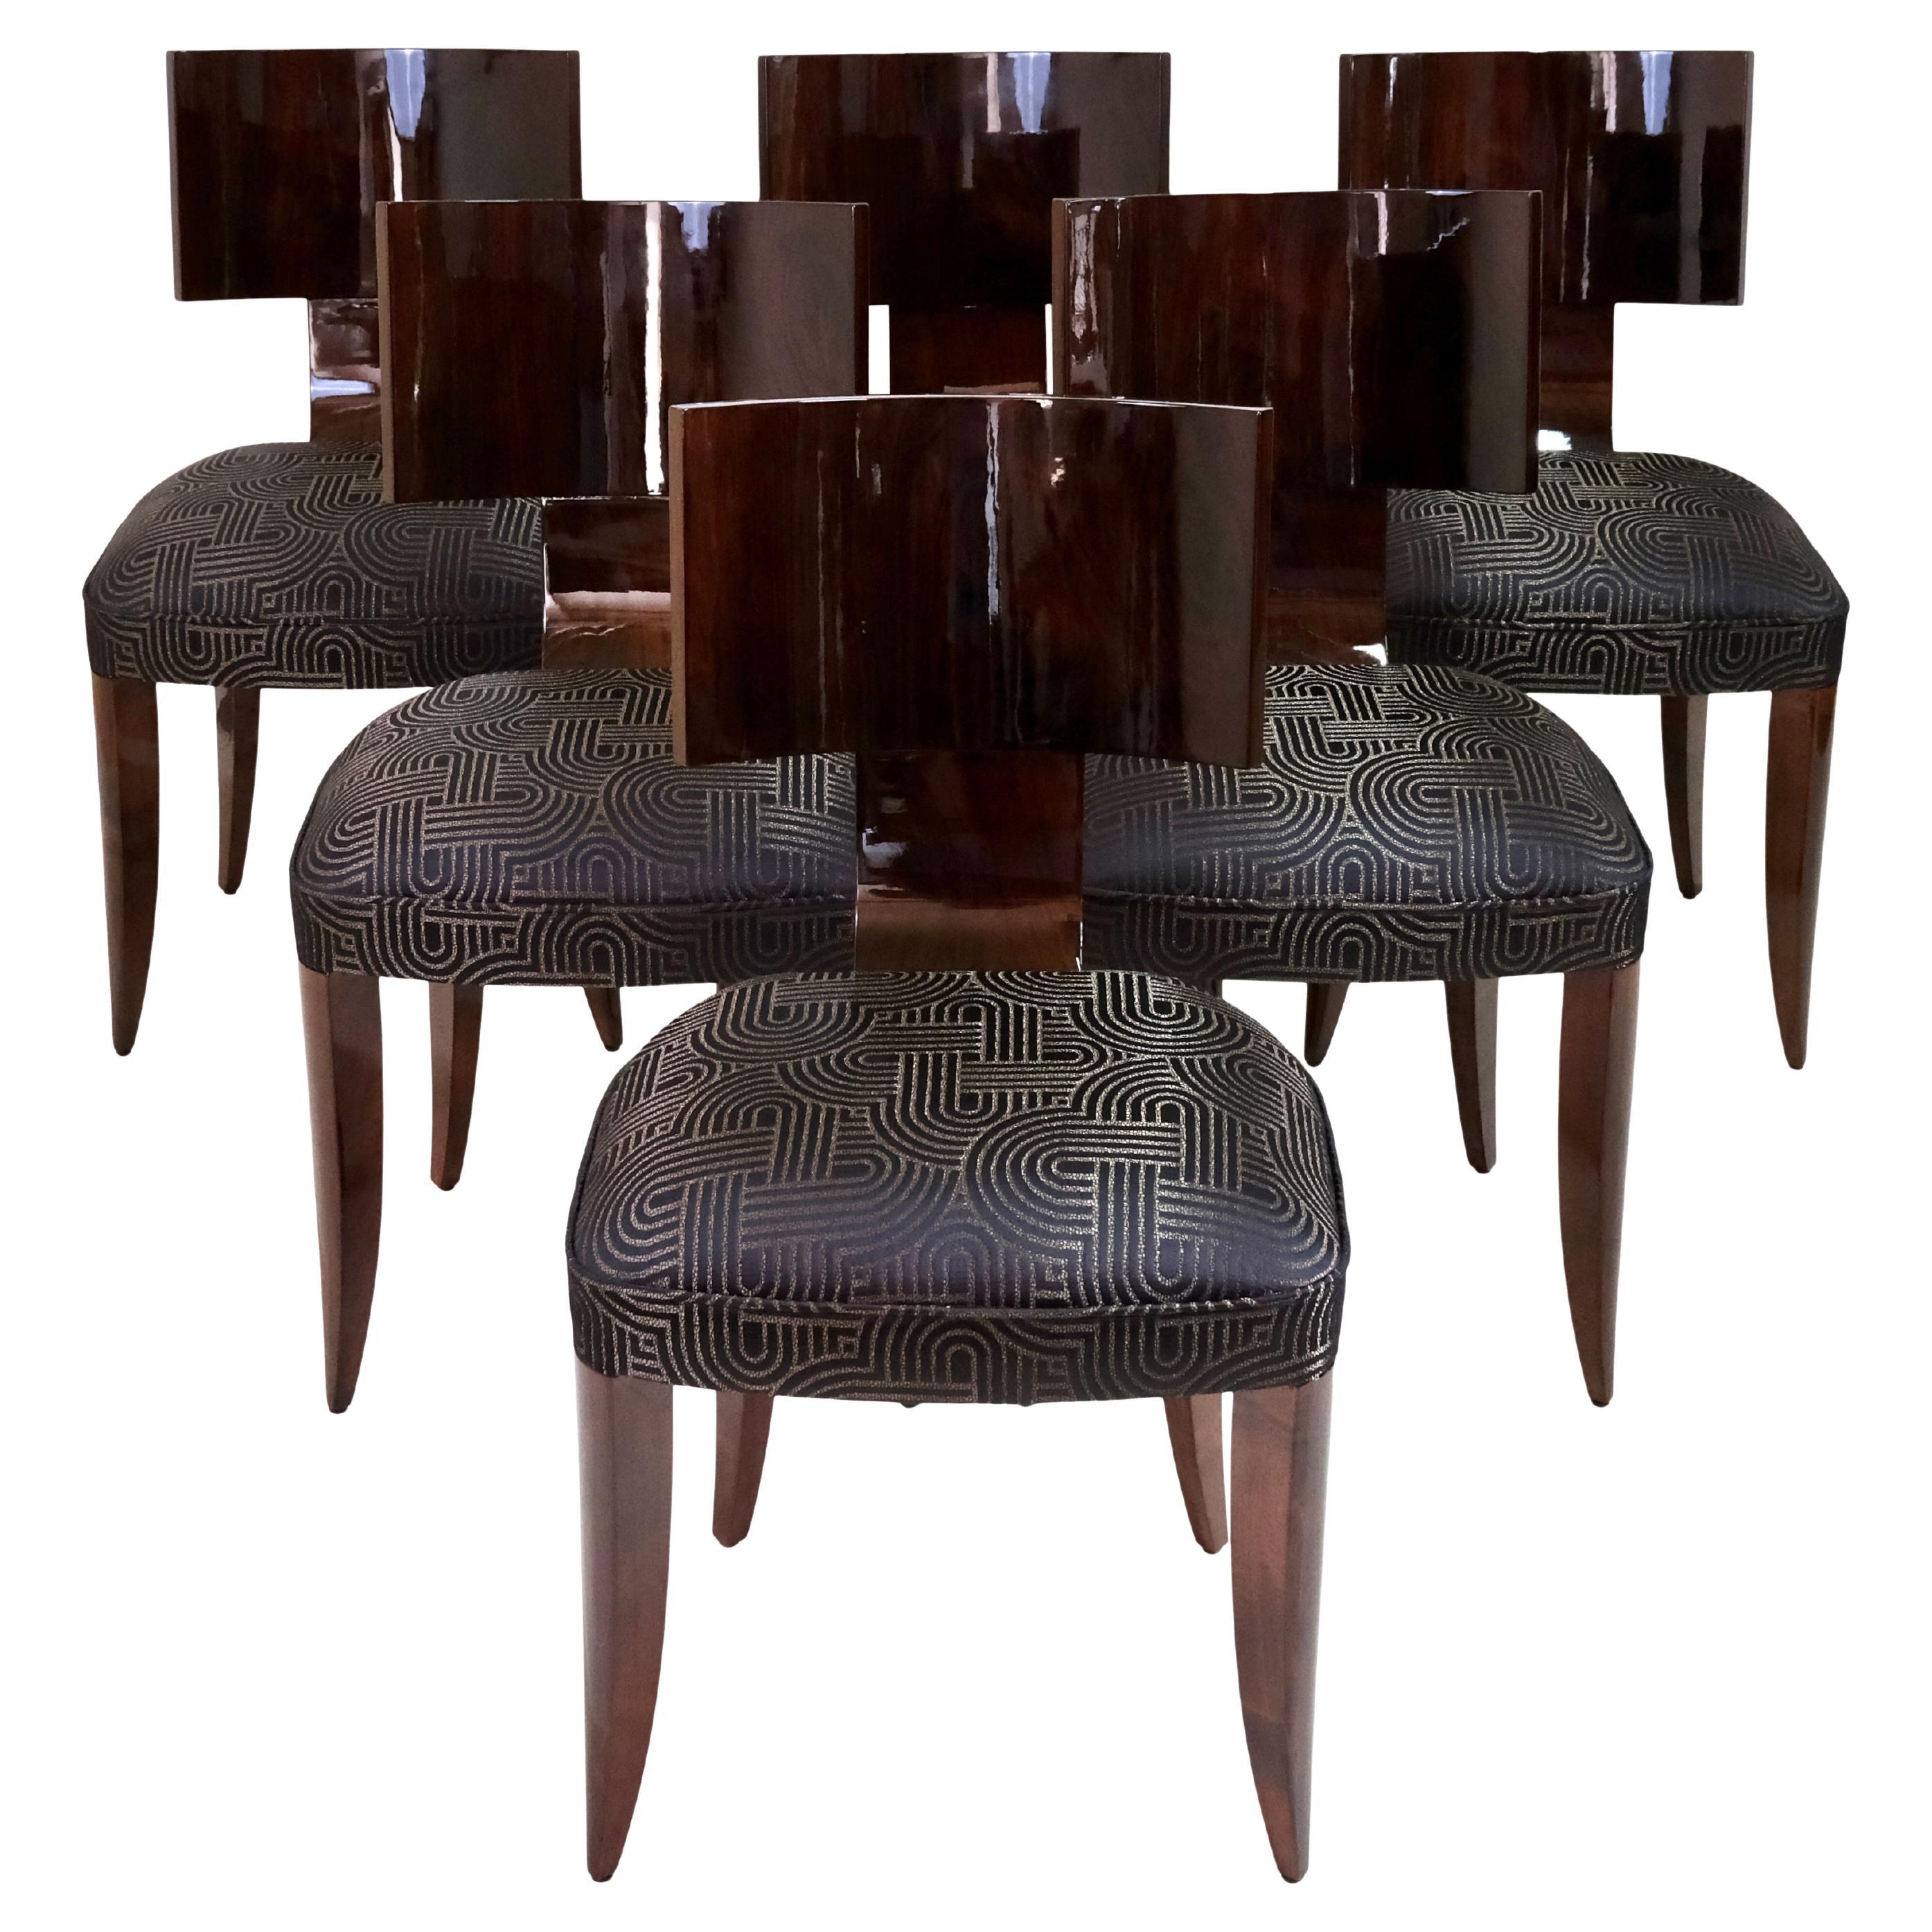 Six Modernist Art Deco Dining Chairs from 1930s France